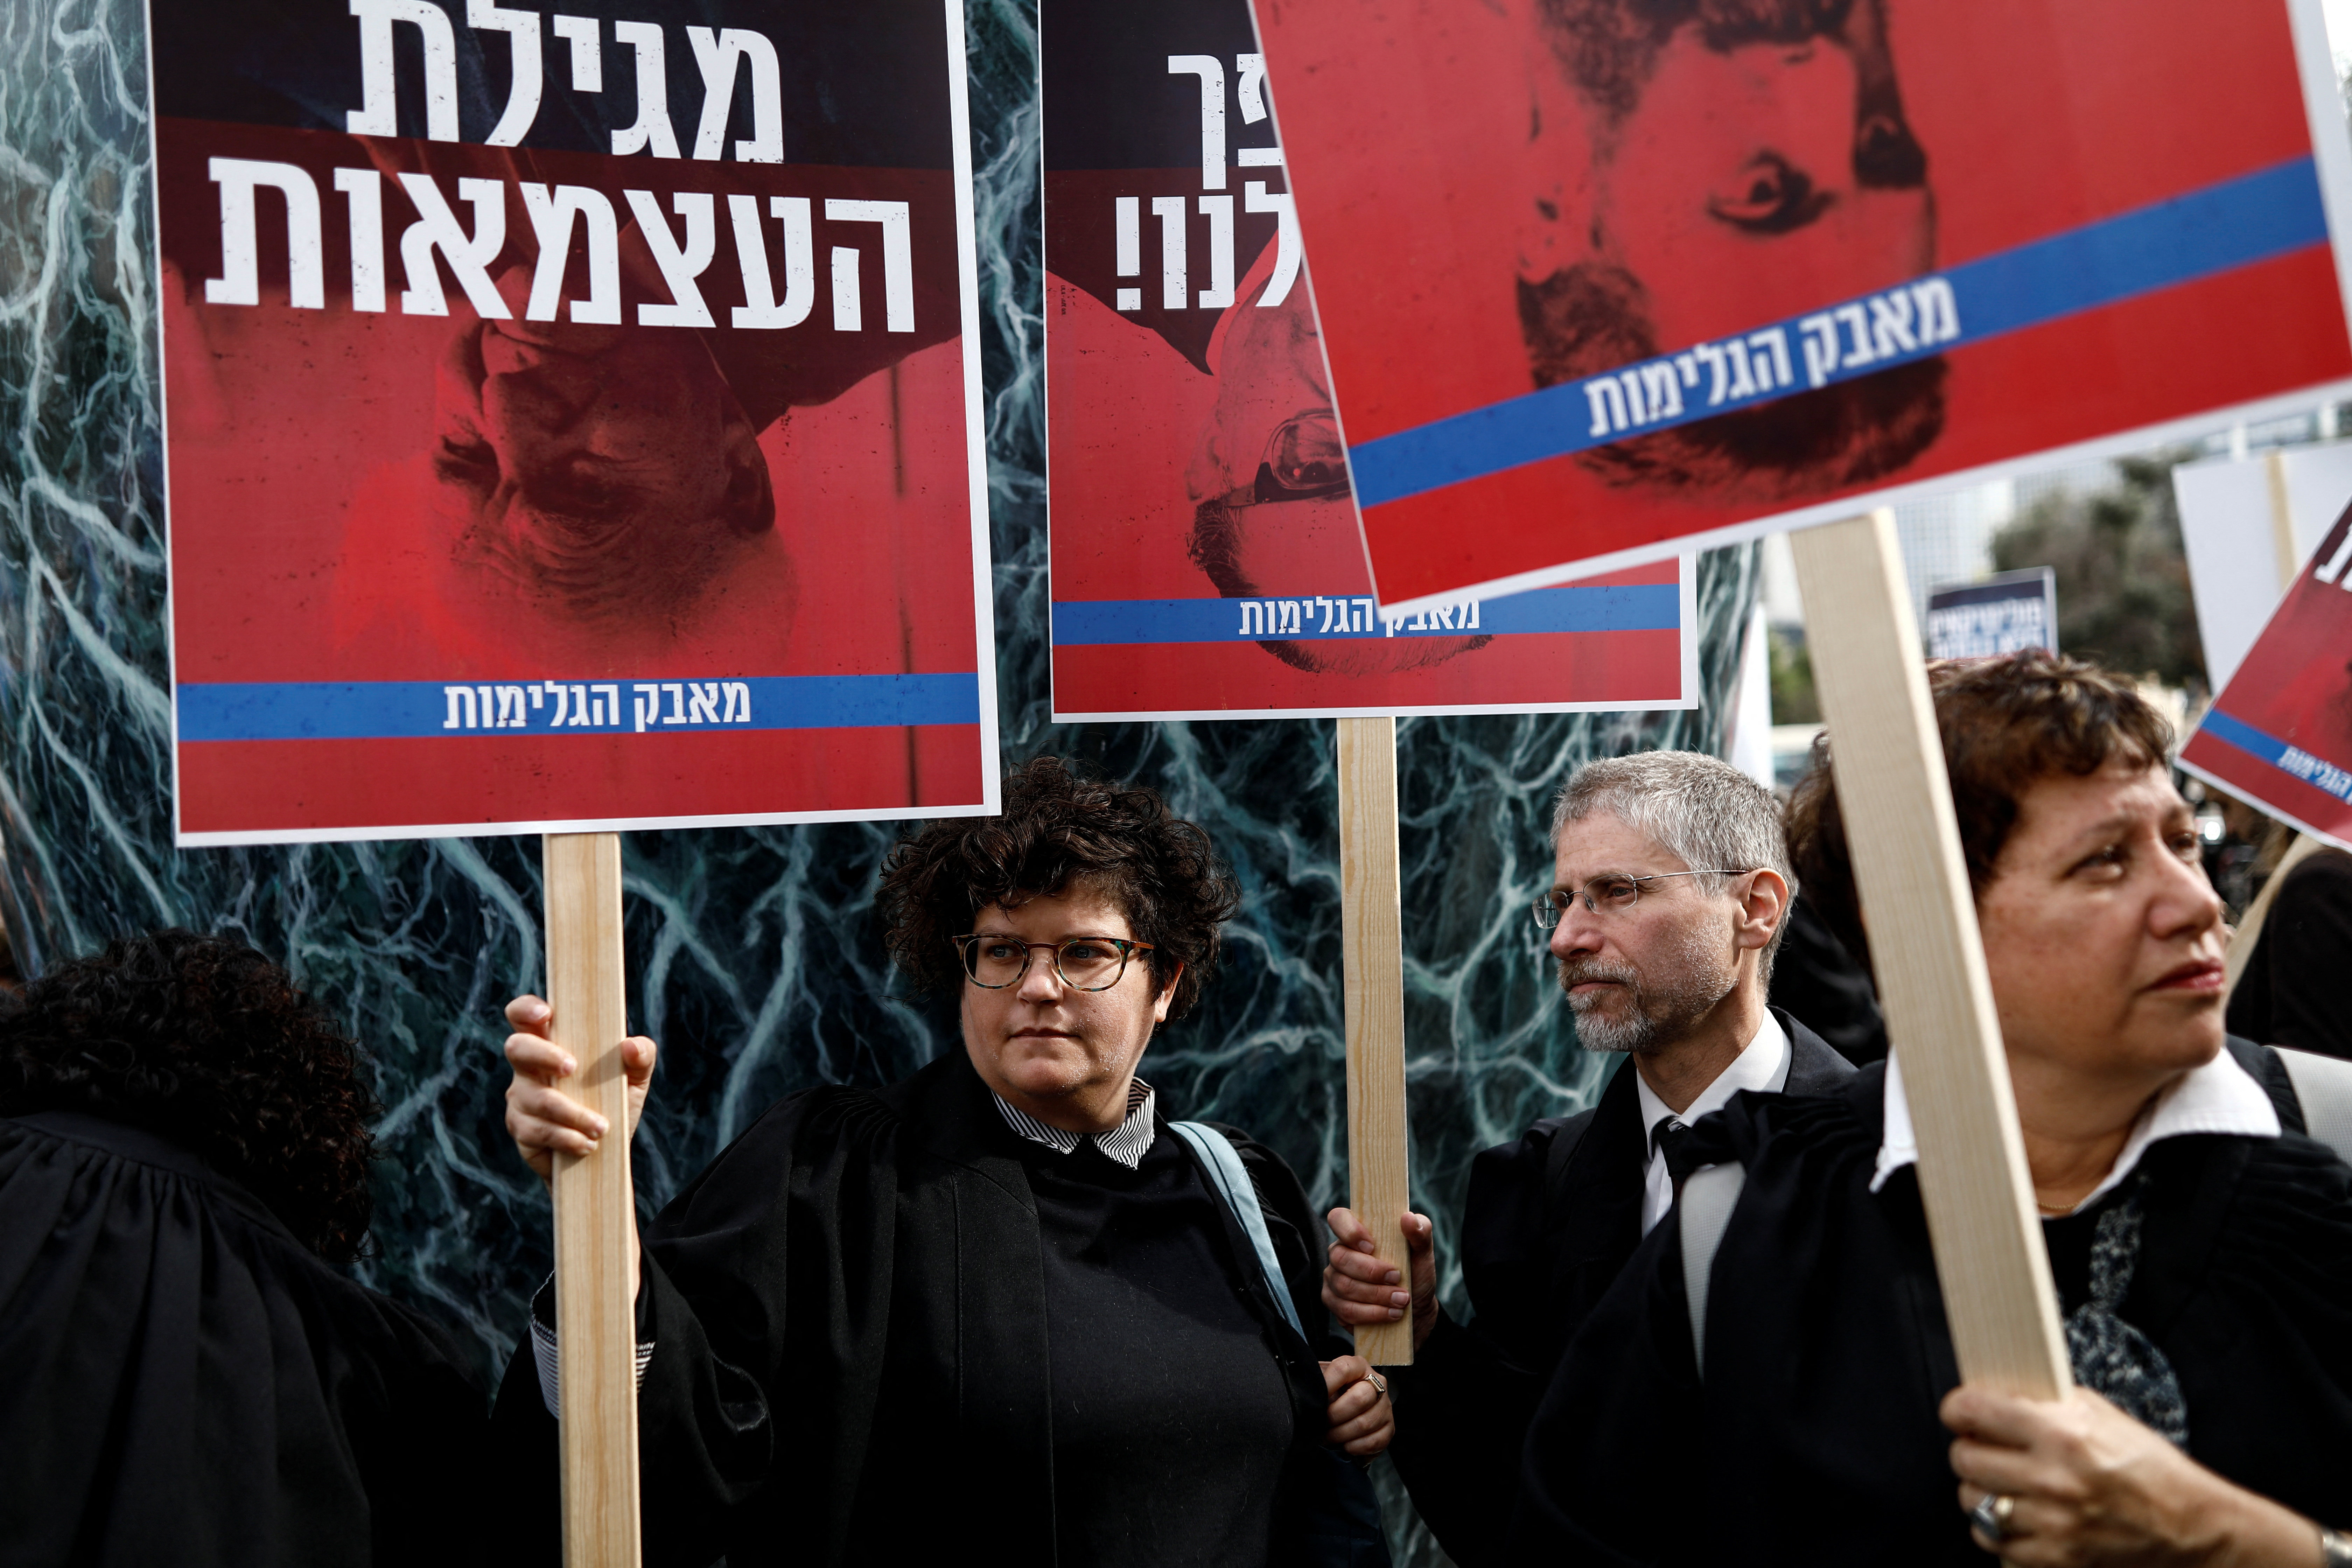 Private Israeli lawyers protest Netanyahu's government court reform in what they call 